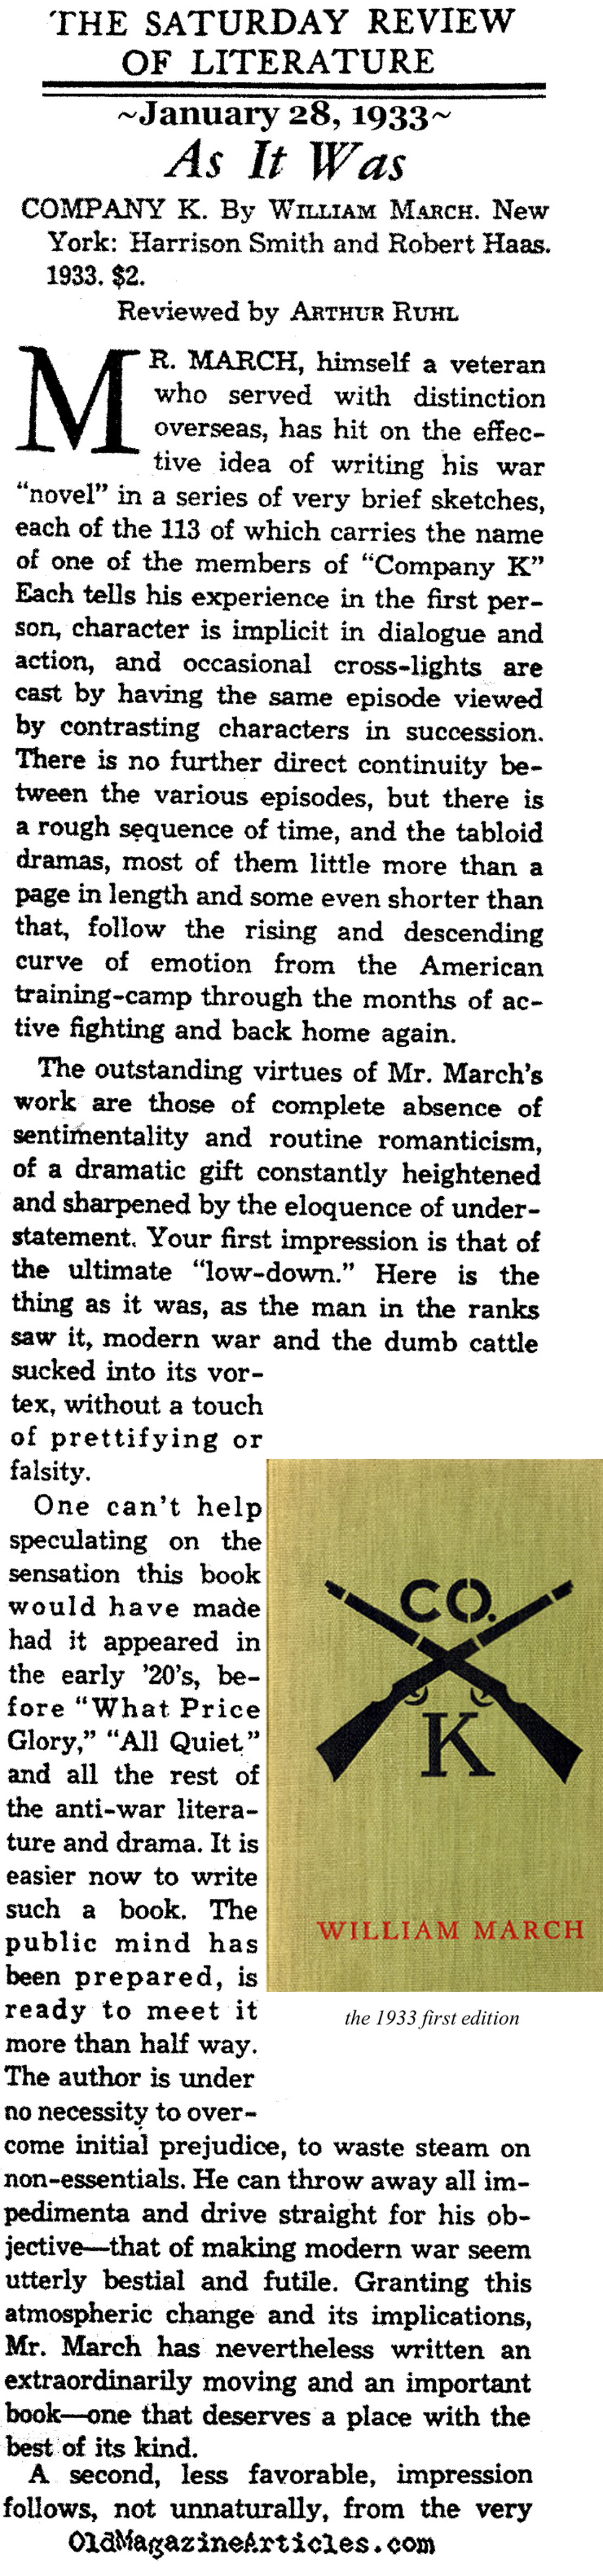 ''Company K'' by William March (Saturday Review of Literature, 1933)